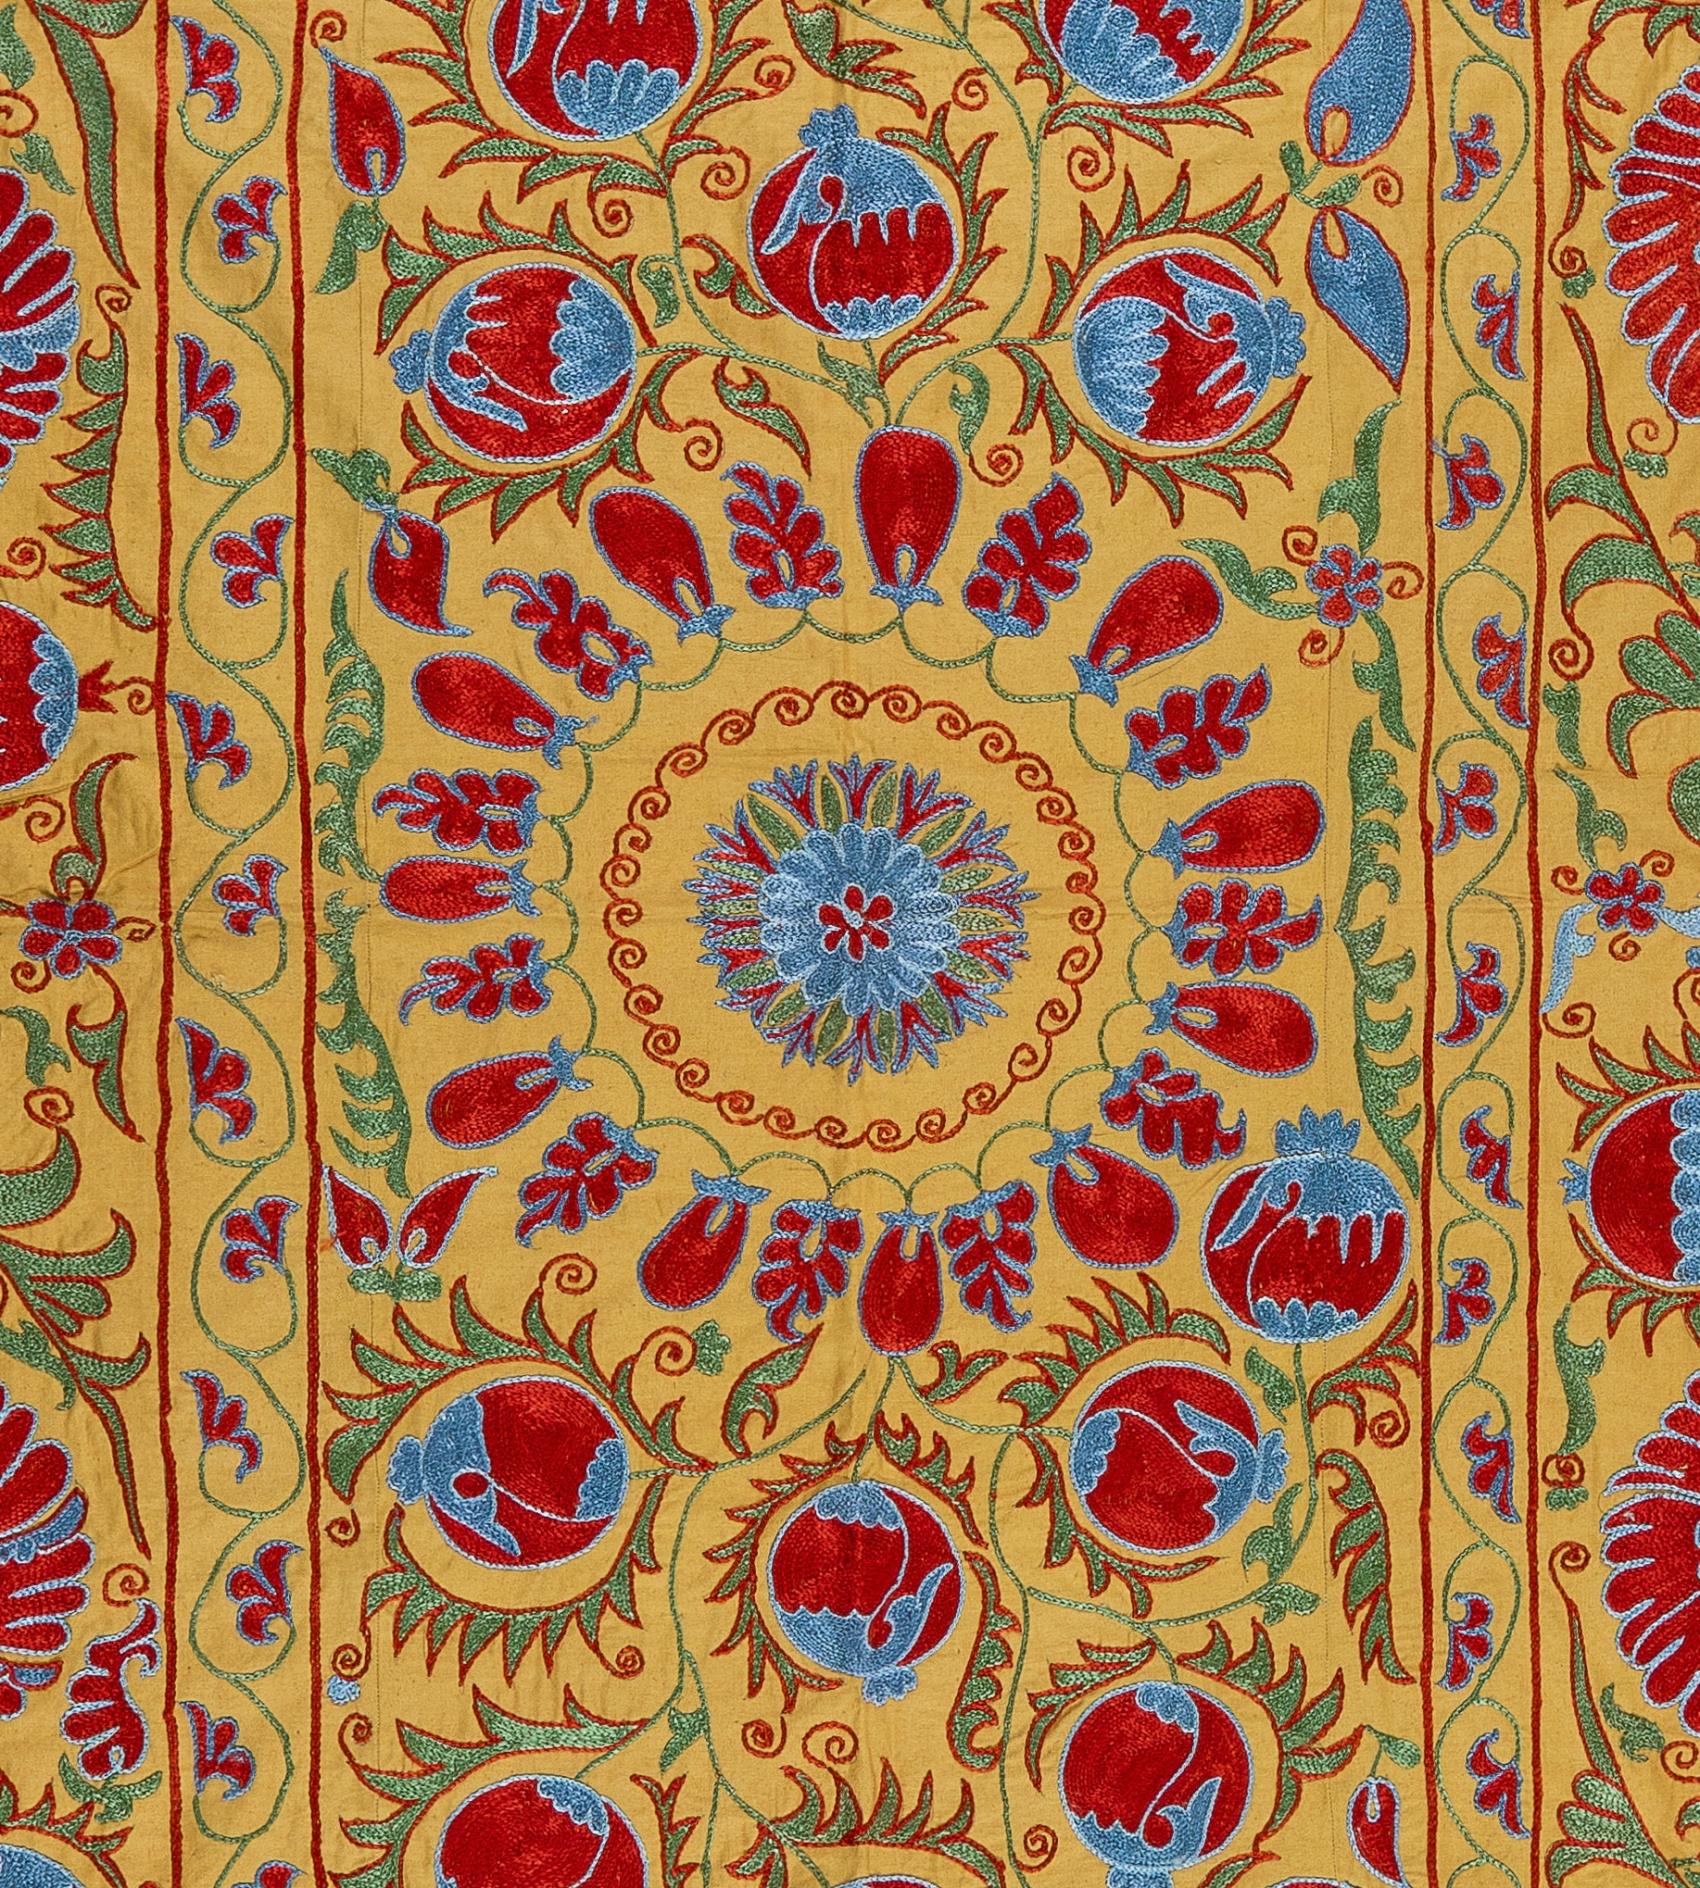 Brand New Uzbek Suzani Textile, Embroidered Cotton & Silk Wall Hanging In New Condition For Sale In Philadelphia, PA